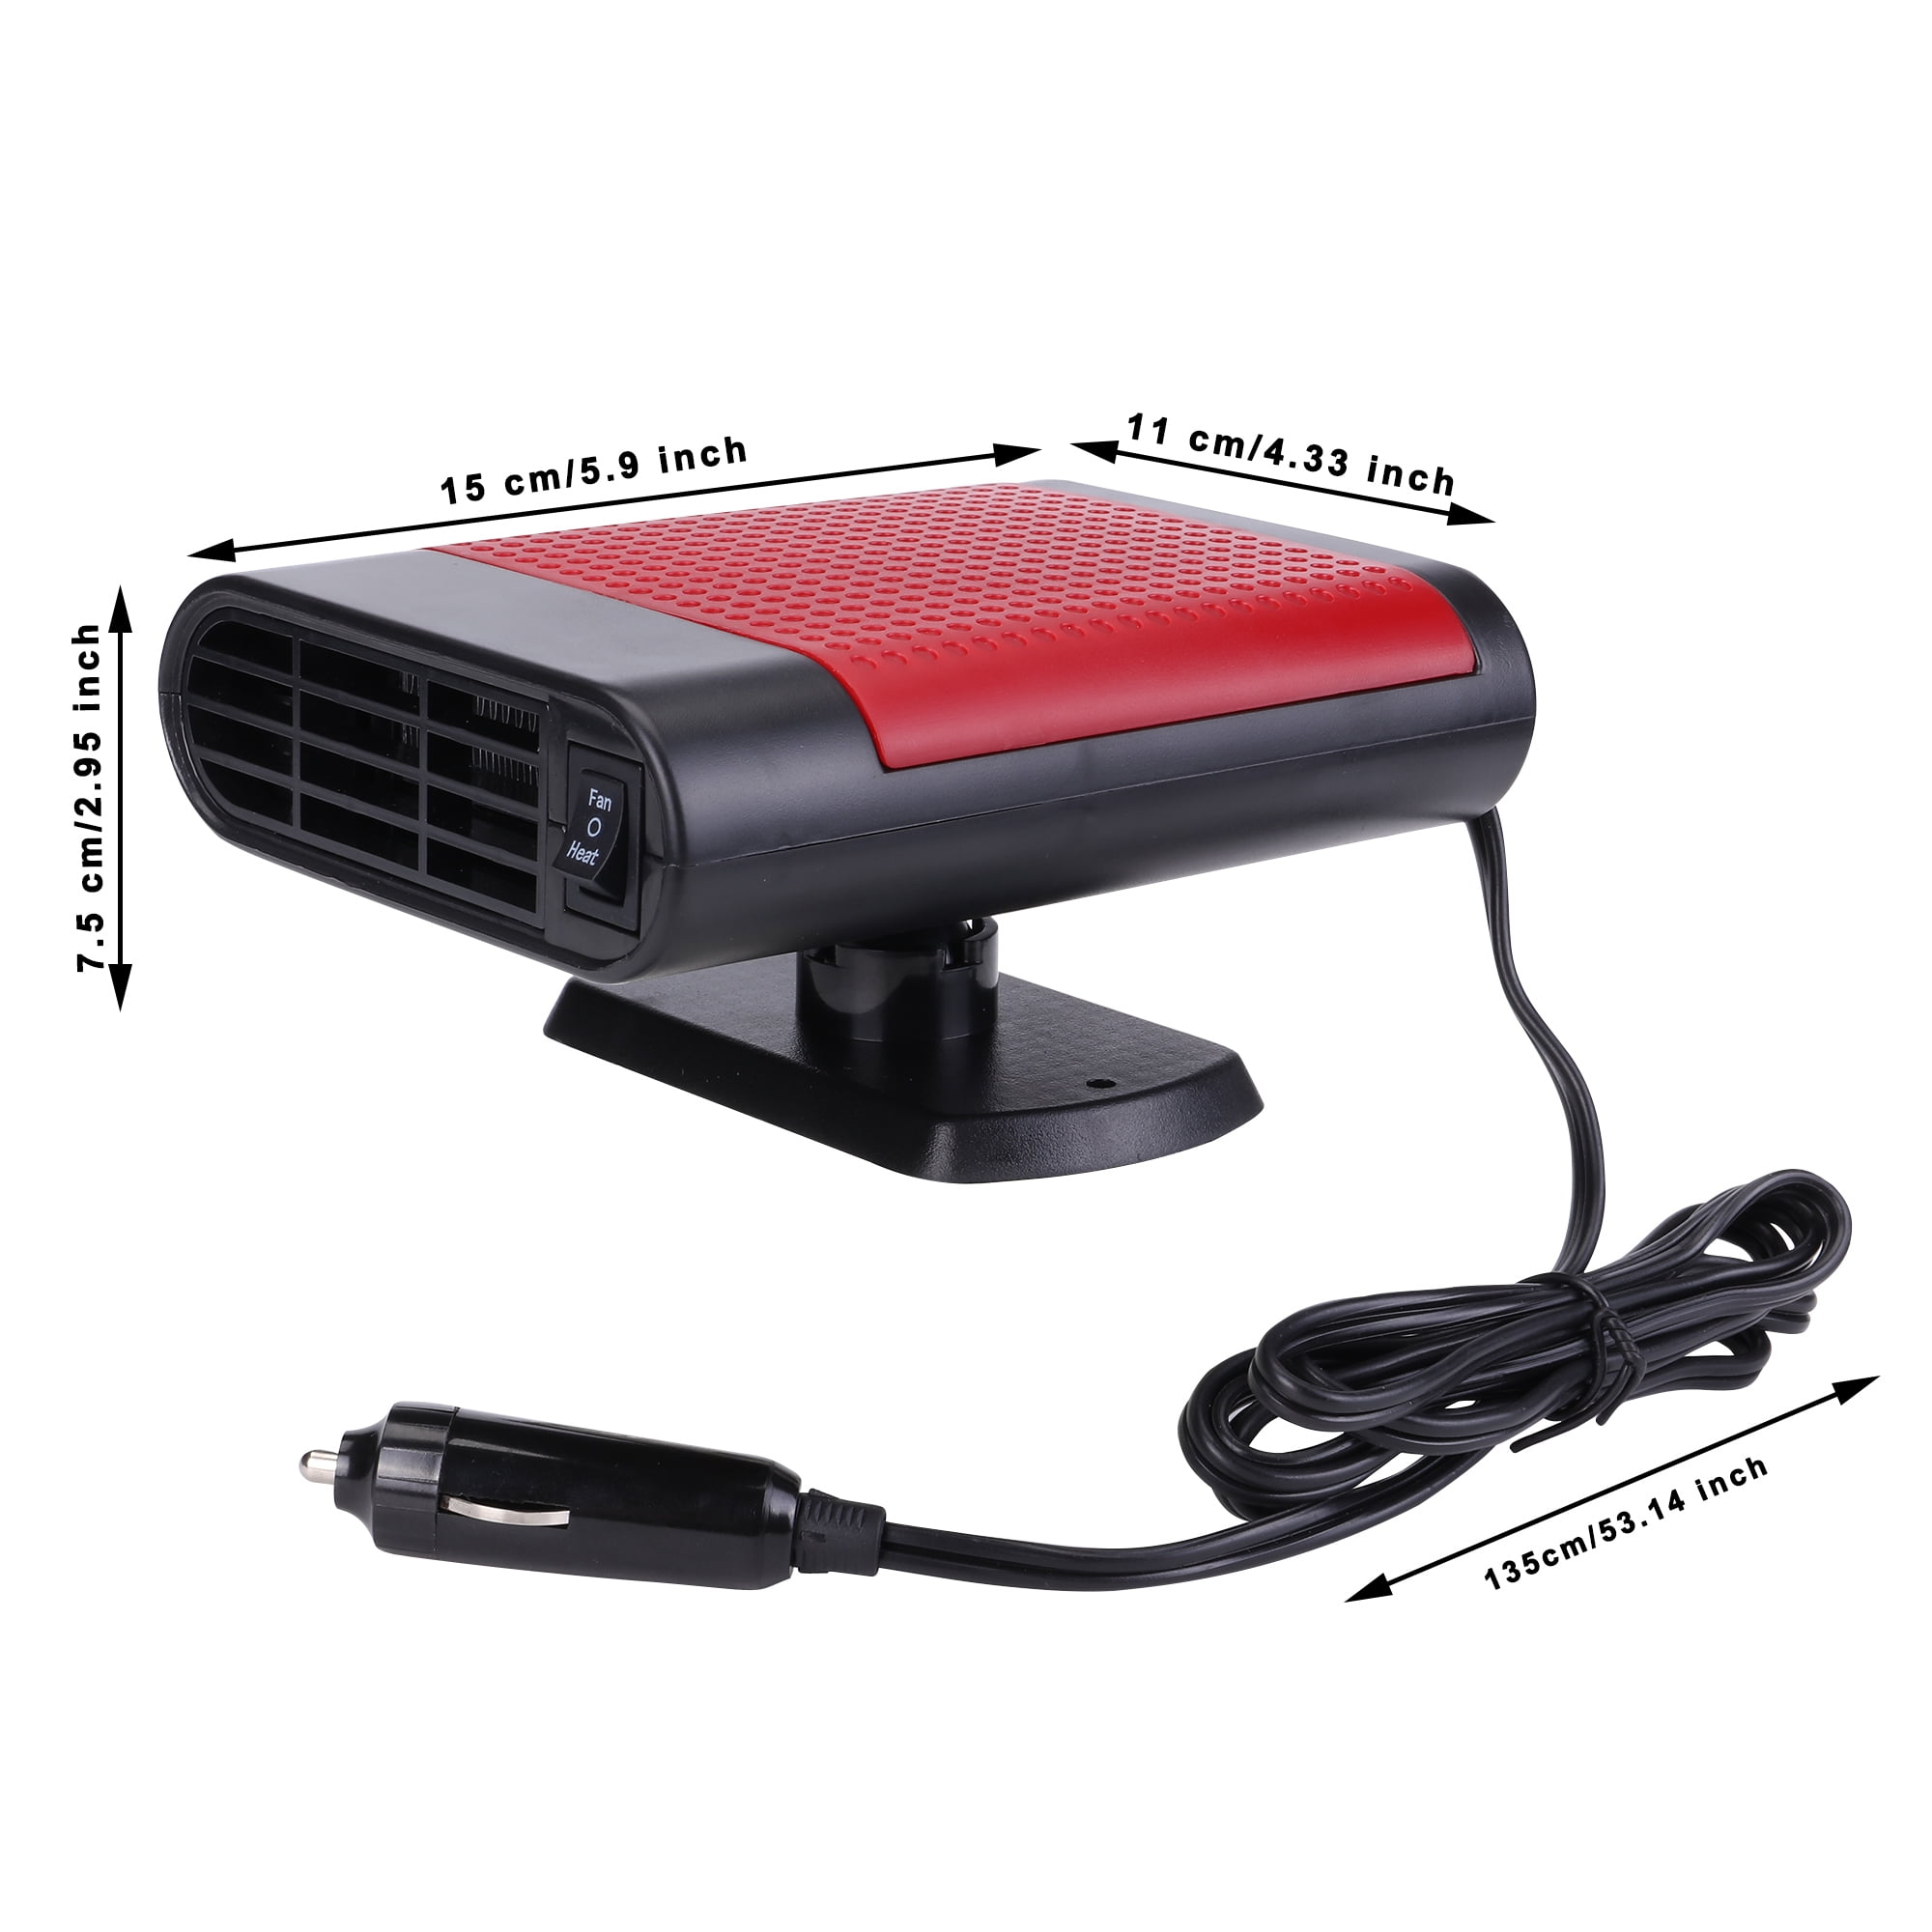 Car Heater Defroster - 12V Fast Heating Defrost Defogger for Car  Windshield, 150W Portable Car Heaters That Plugs into Cigarette Lighter  with 180°